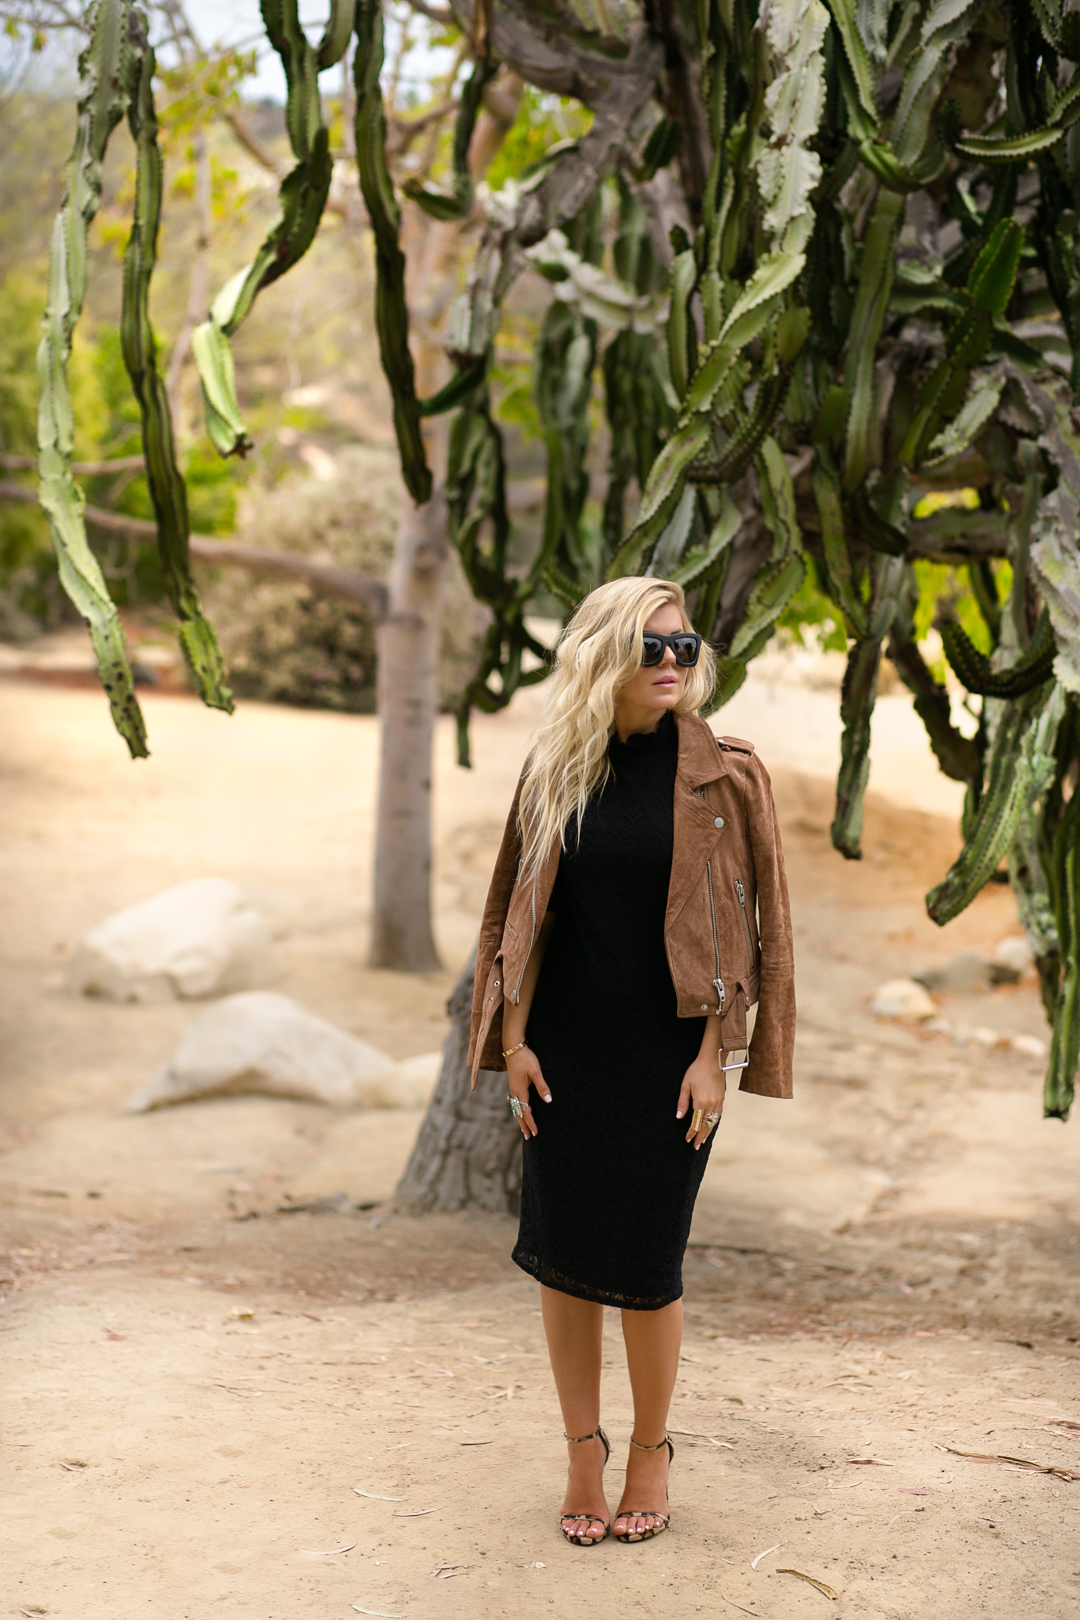 Lisa Allen of LunchPails and Lipstick wearing a BlankNYC suede jacket with a black lace dress and Stuart Weitzman Nudist heels at balboa park.